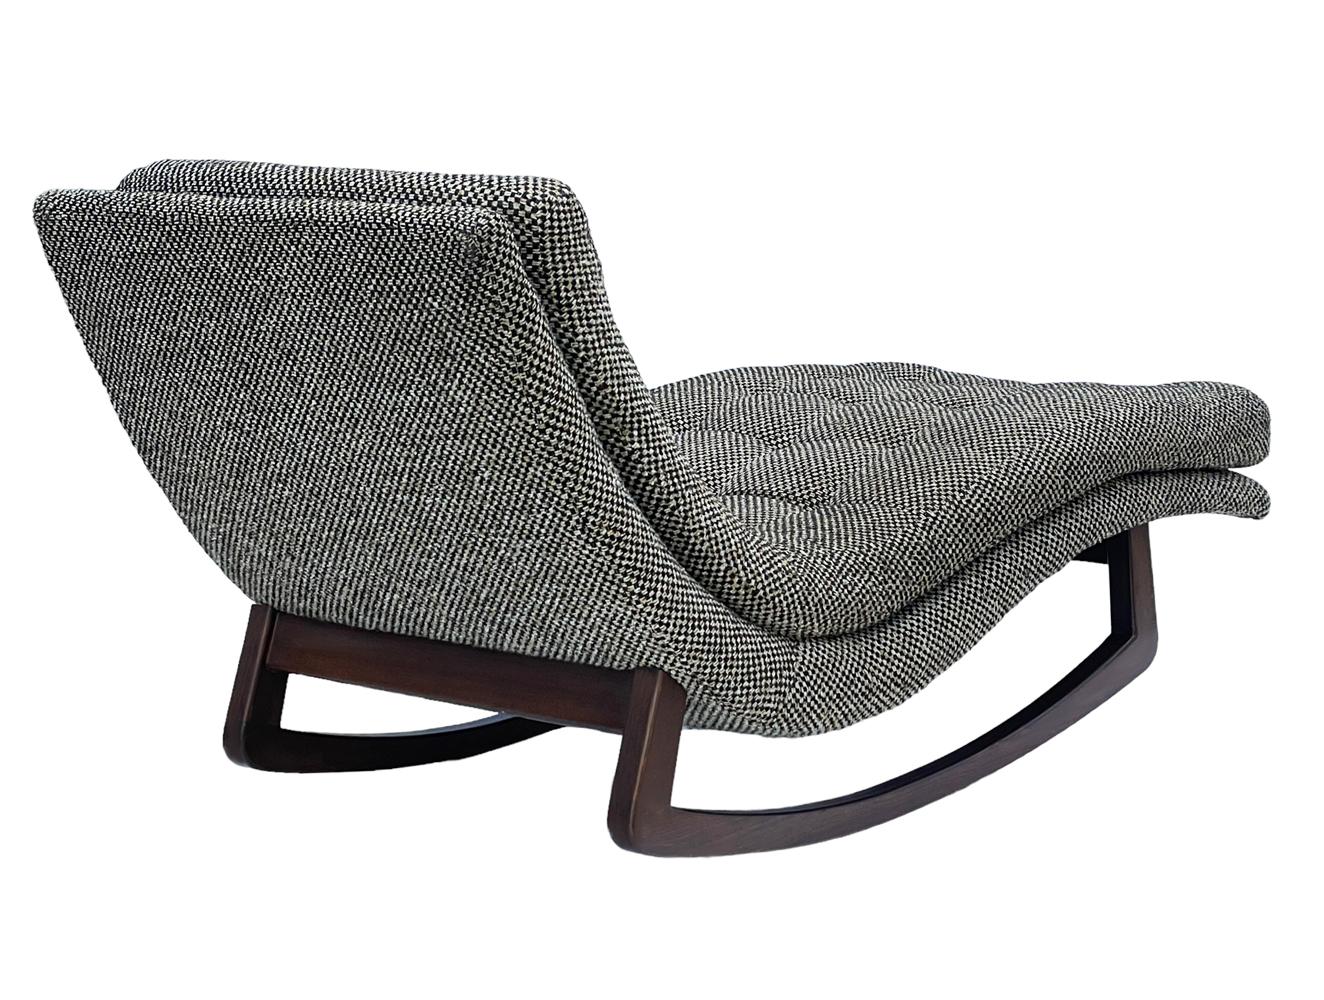 American Mid Century Modern Walnut Rocking Chaise Lounge Chair after Adrian Pearsall For Sale